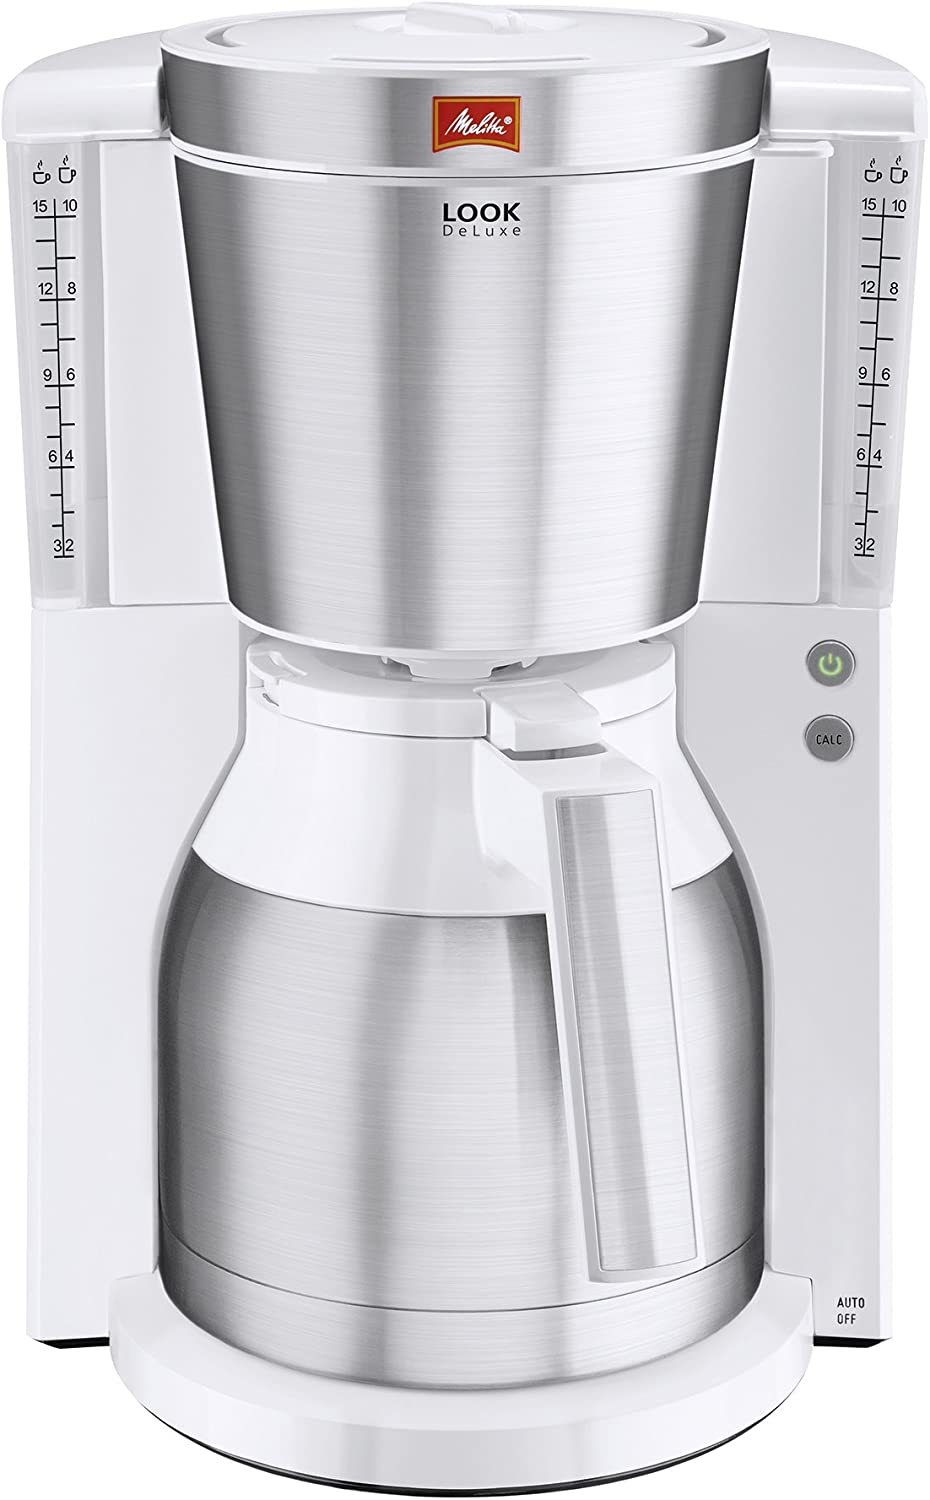 Melitta 101113 coffee filter machine Look Therm DeLuxe, aroma selector, limescale protection, white / stainless steel